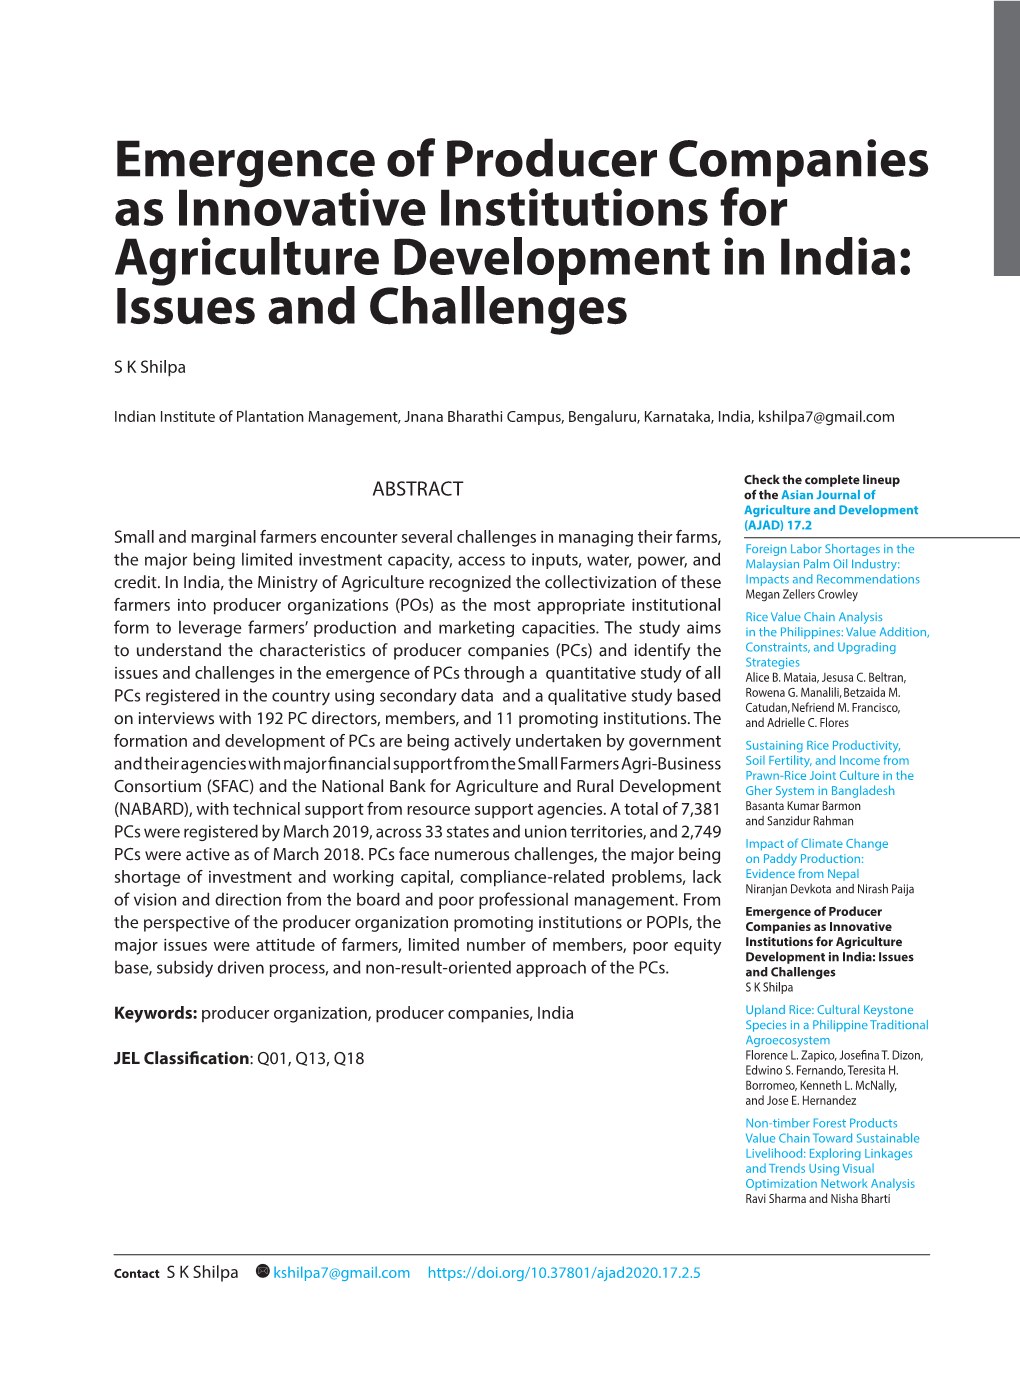 Emergence of Producer Companies As Innovative Institutions for Agriculture Development in India: Issues and Challenges